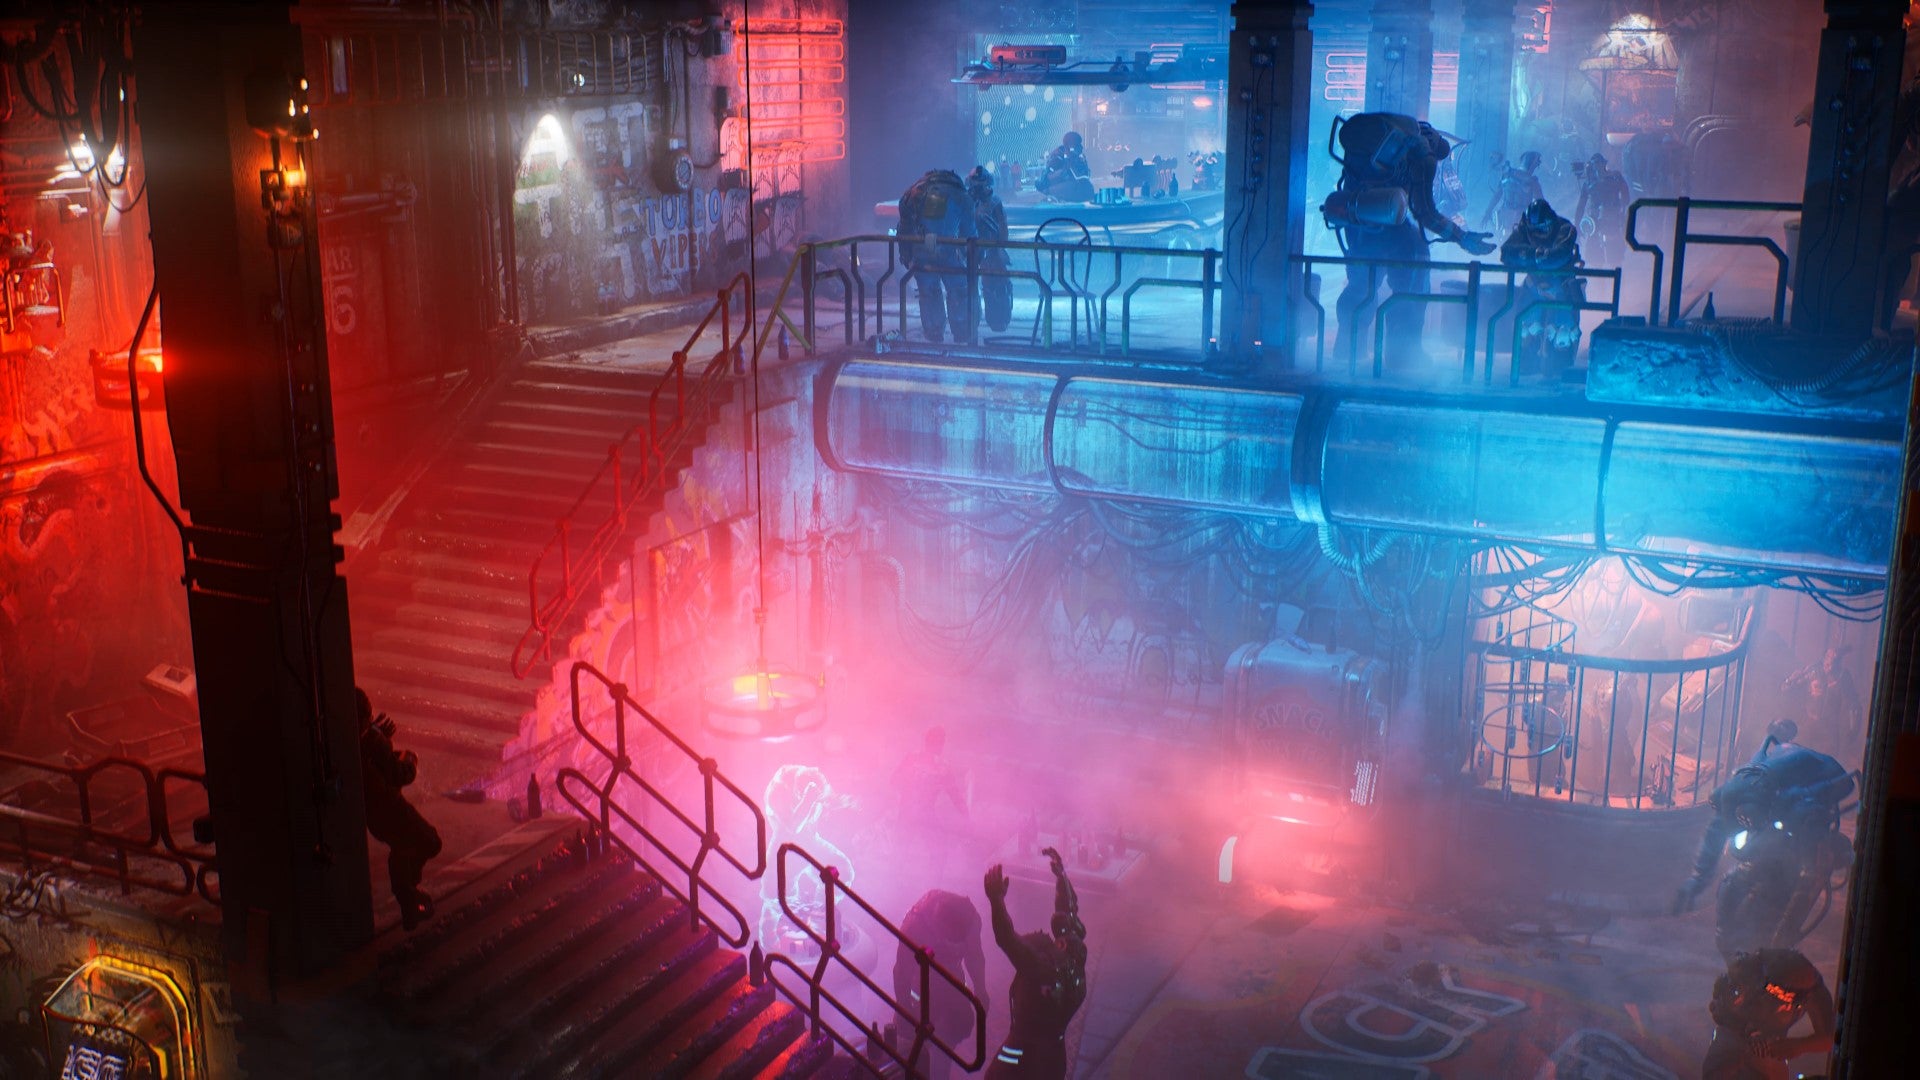 An image of the The Ascent which shows a neon-lit, underground club.